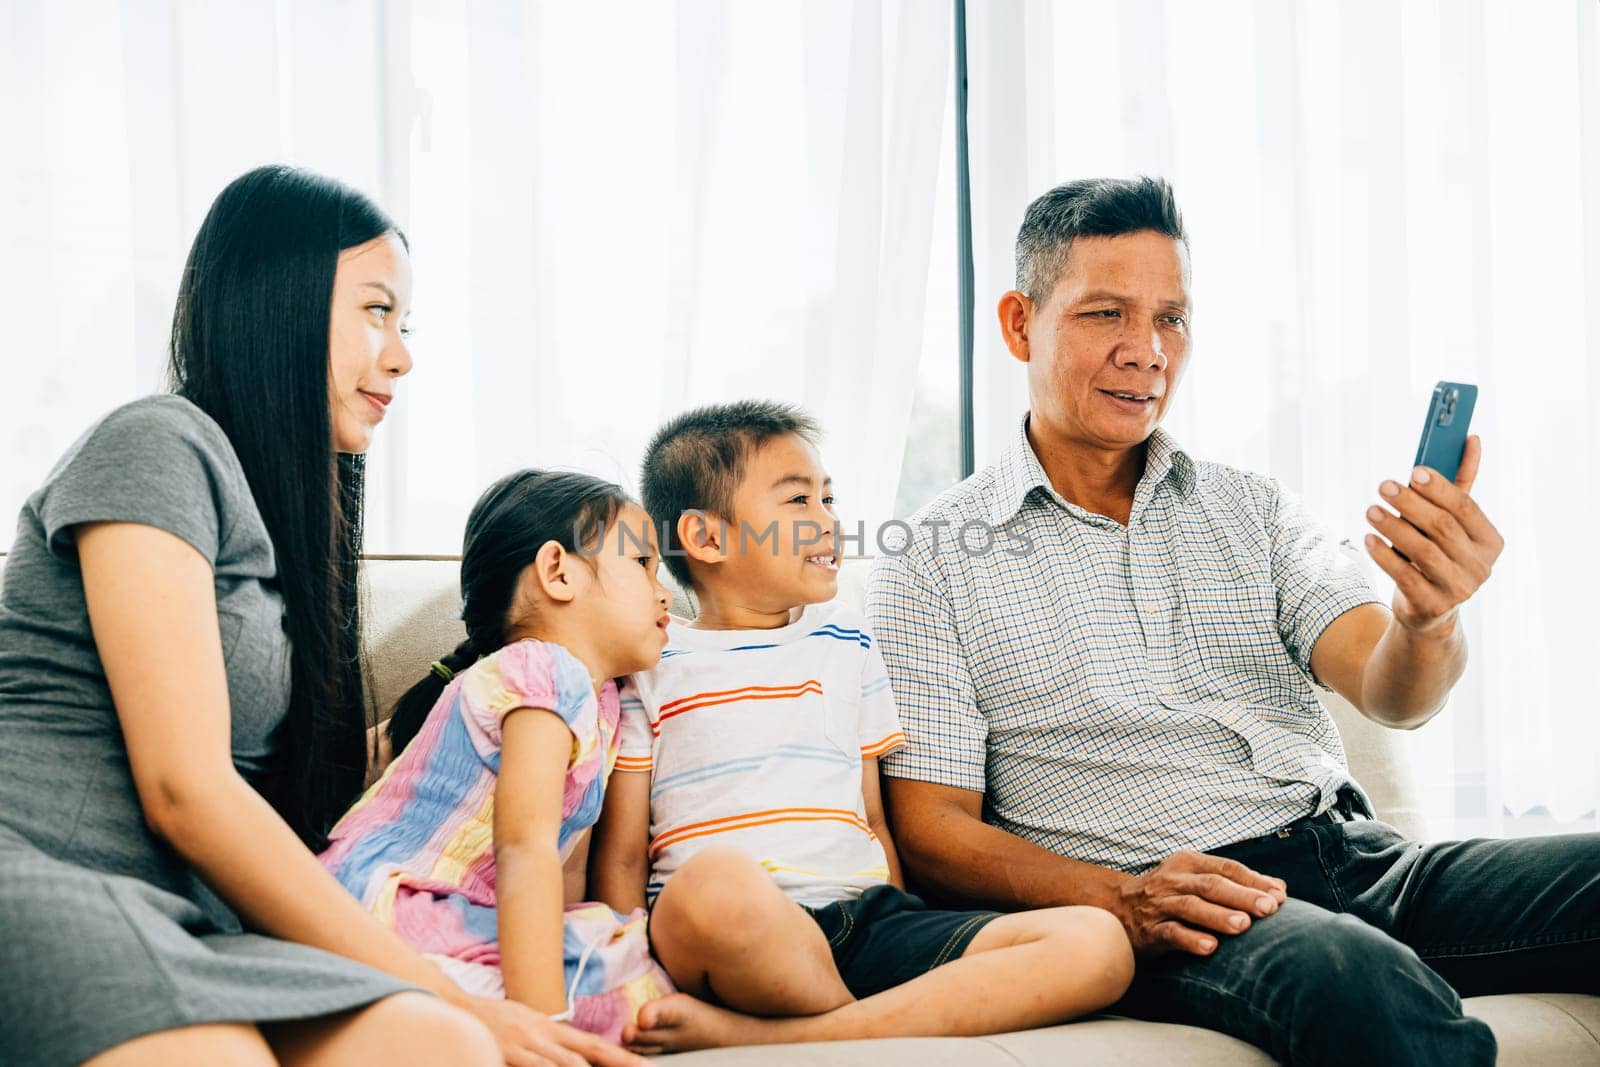 A cheerful family enjoys entertainment on a smartphone laughing together on a couch. This portrays familial happiness bonding and shared moments of technology entertainment.